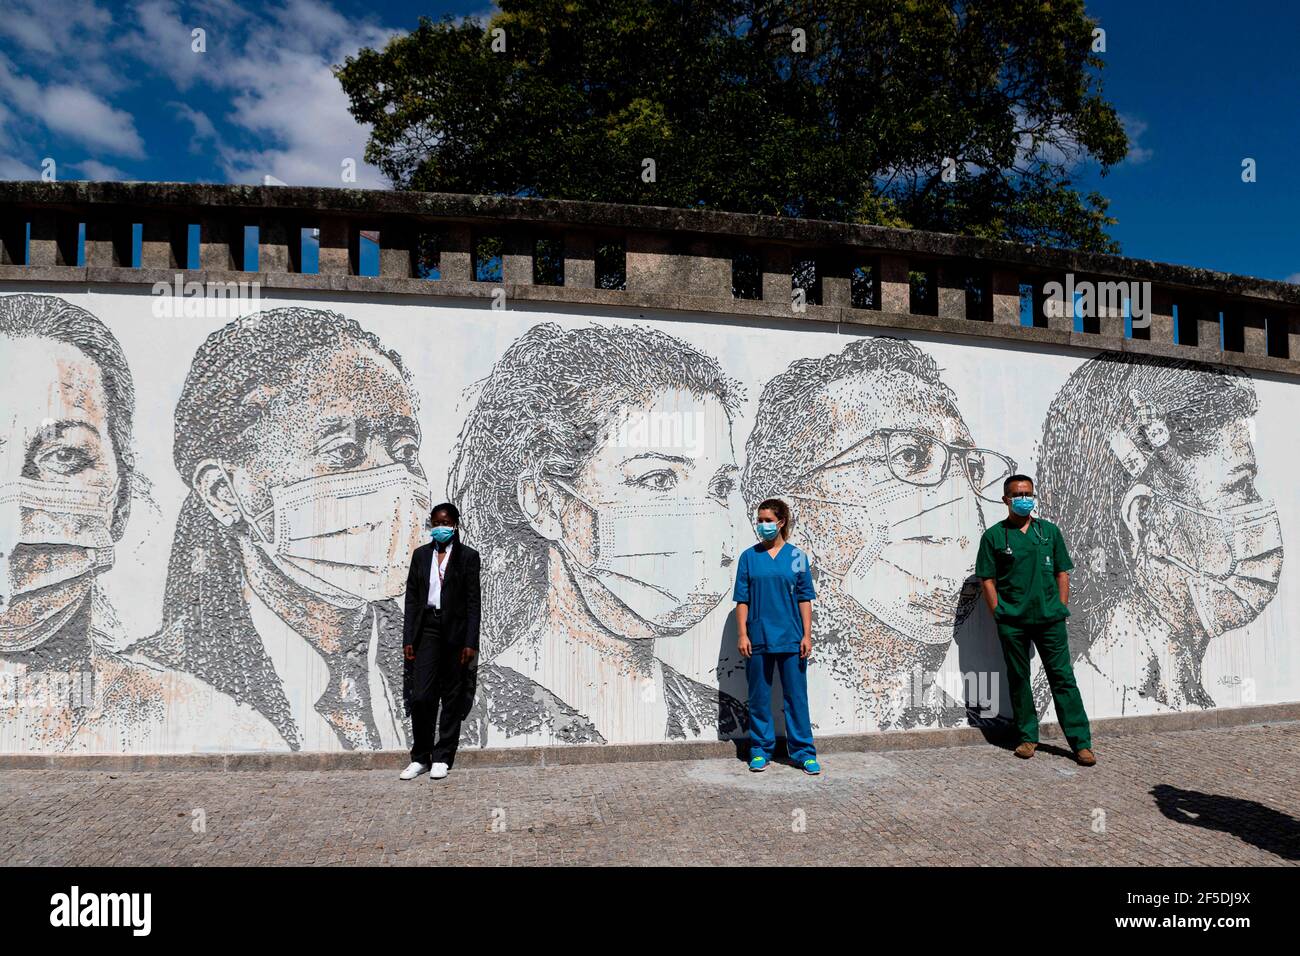 Porto, Portugal. 19th June, 2020. From left to right, Cristina Teixeira, receptionist, PatrÃ-cia Botelho, nurse and David Andrade, doctor next to the mural 'Linha da Frente: Projeto Scratching the Surface'', meaning ''Frontline: Project Scratching the Surface'' paying tribute to all the hospital staff in the frontline. Not only doctors and nurses but also janitors and receptionists by Vhils, a famous Portuguese street artist.The street murals are located at the Hospital de SÃ£o JoÃ£o, one of the biggest hospitals in Portugal and the main one to take care of COVID-19 patients in the northern Stock Photo